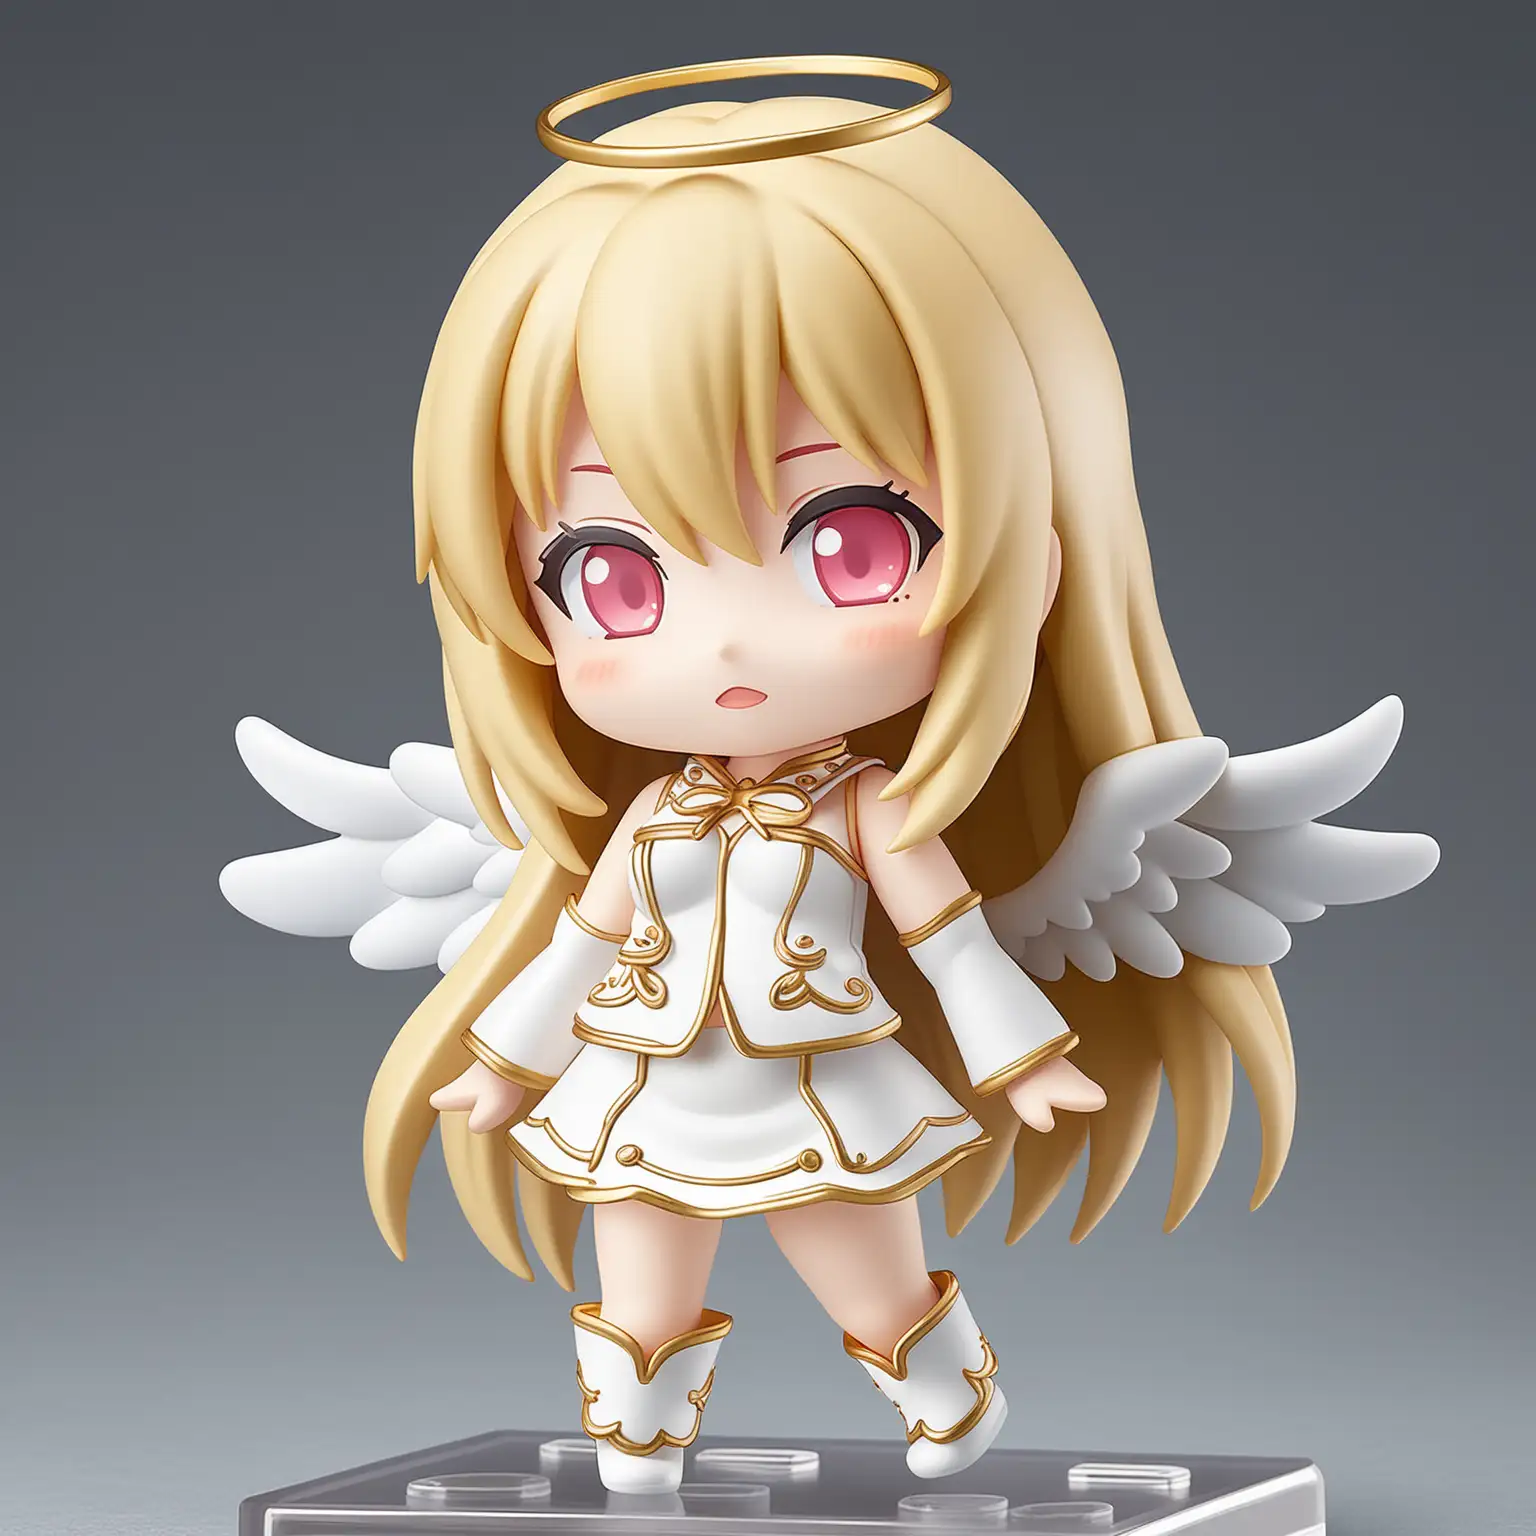 Playful Nendoroid Style Sexy Women in Light Pink Angel Costume with Angel Wings